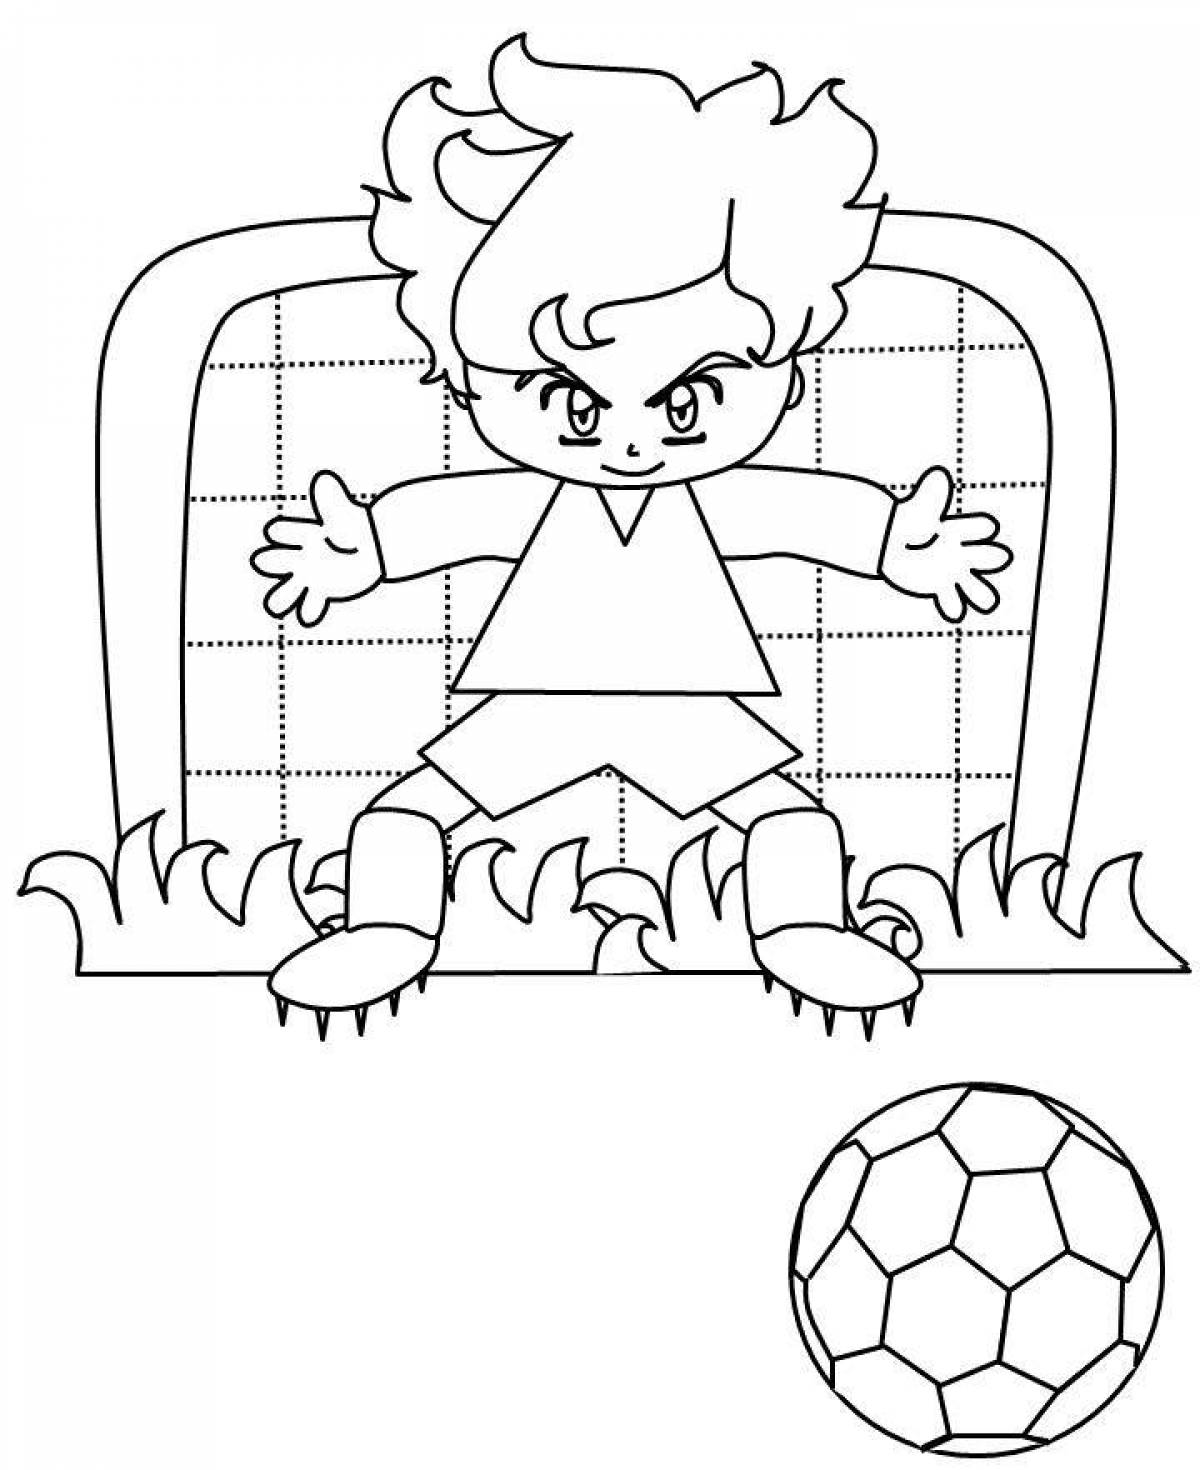 Dynamic football coloring book for kids